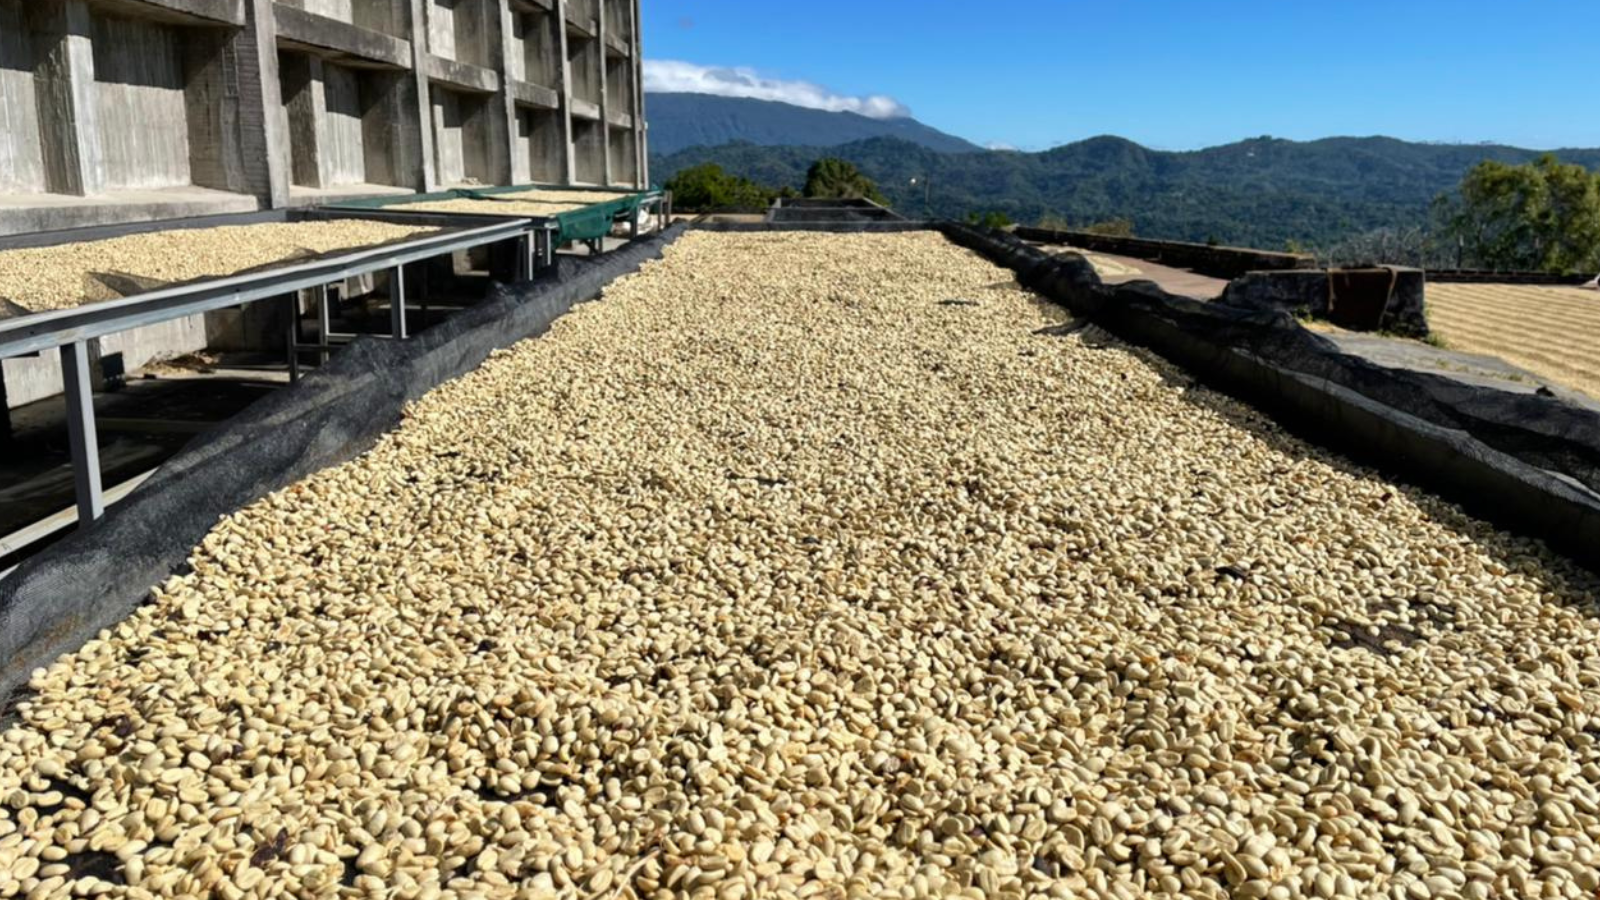 Green coffee drying on raised beds in El Salvador